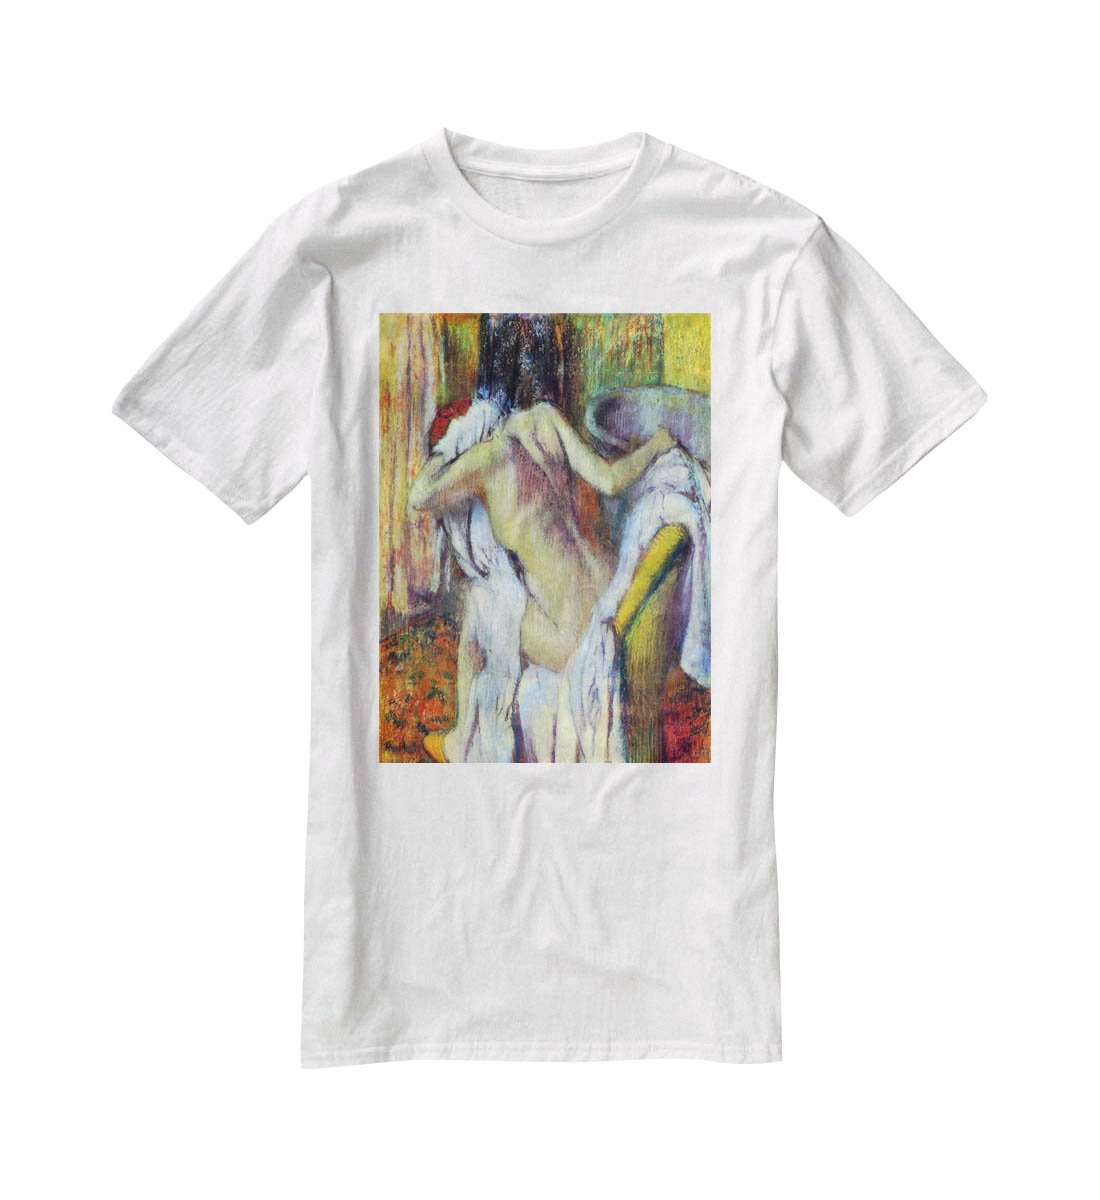 After Bathing 4 by Degas T-Shirt - Canvas Art Rocks - 5